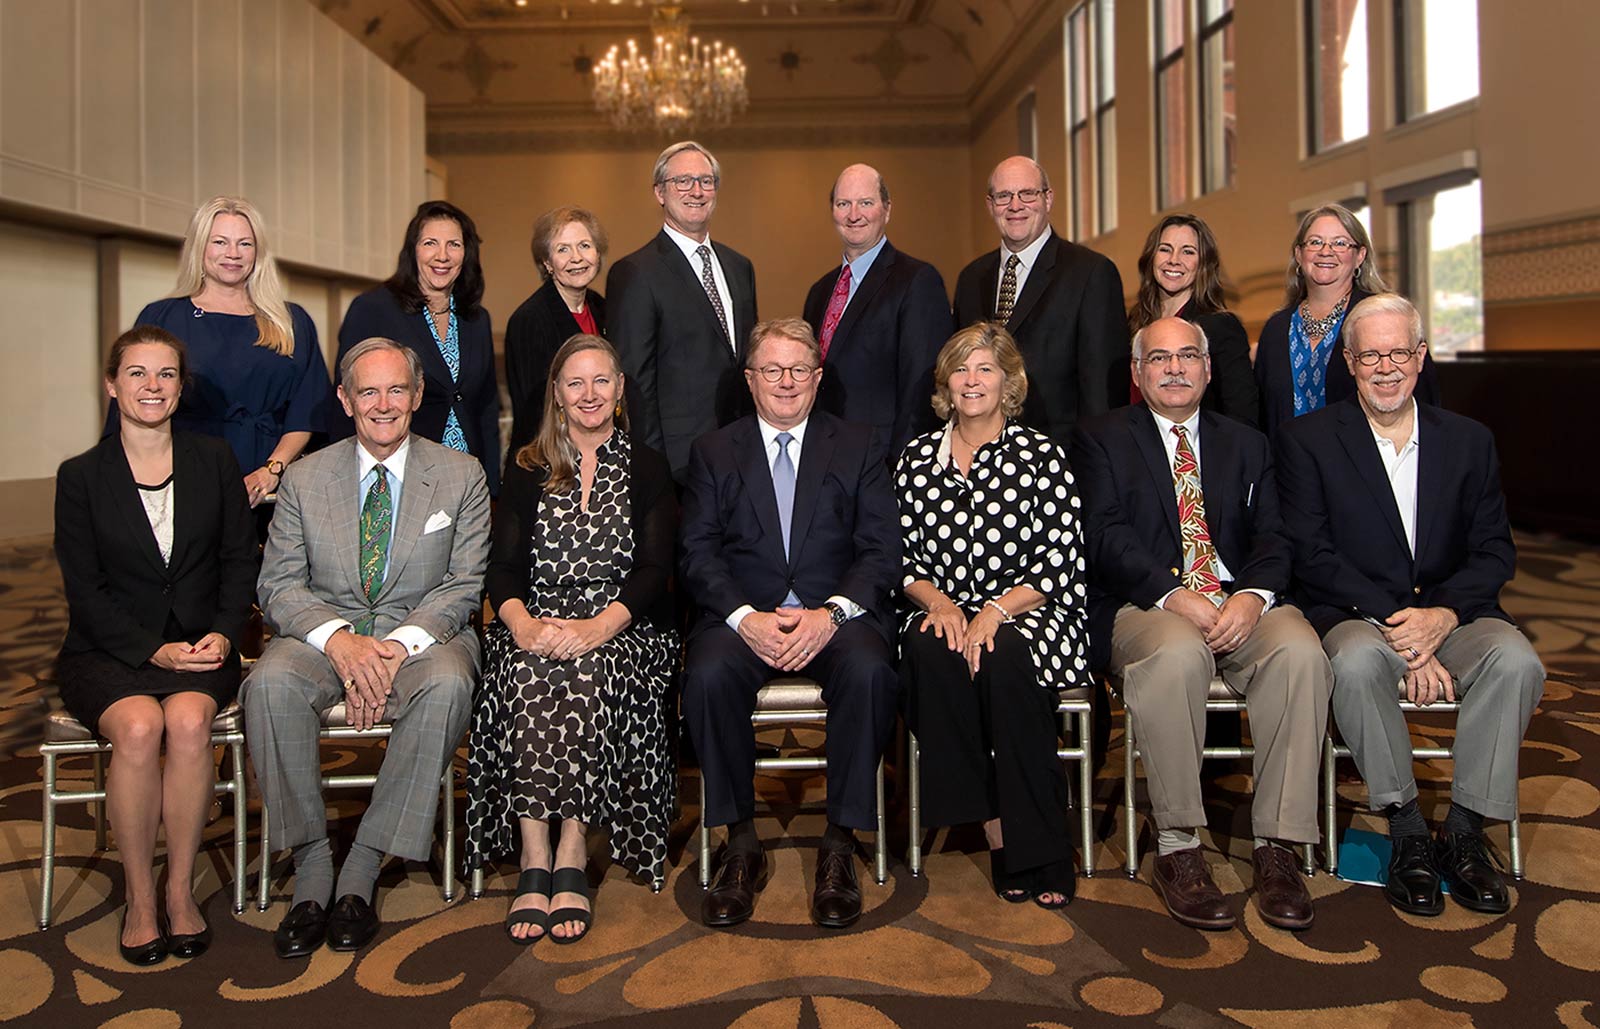 Board of Directors 2018-2019, Friends of Music Hall